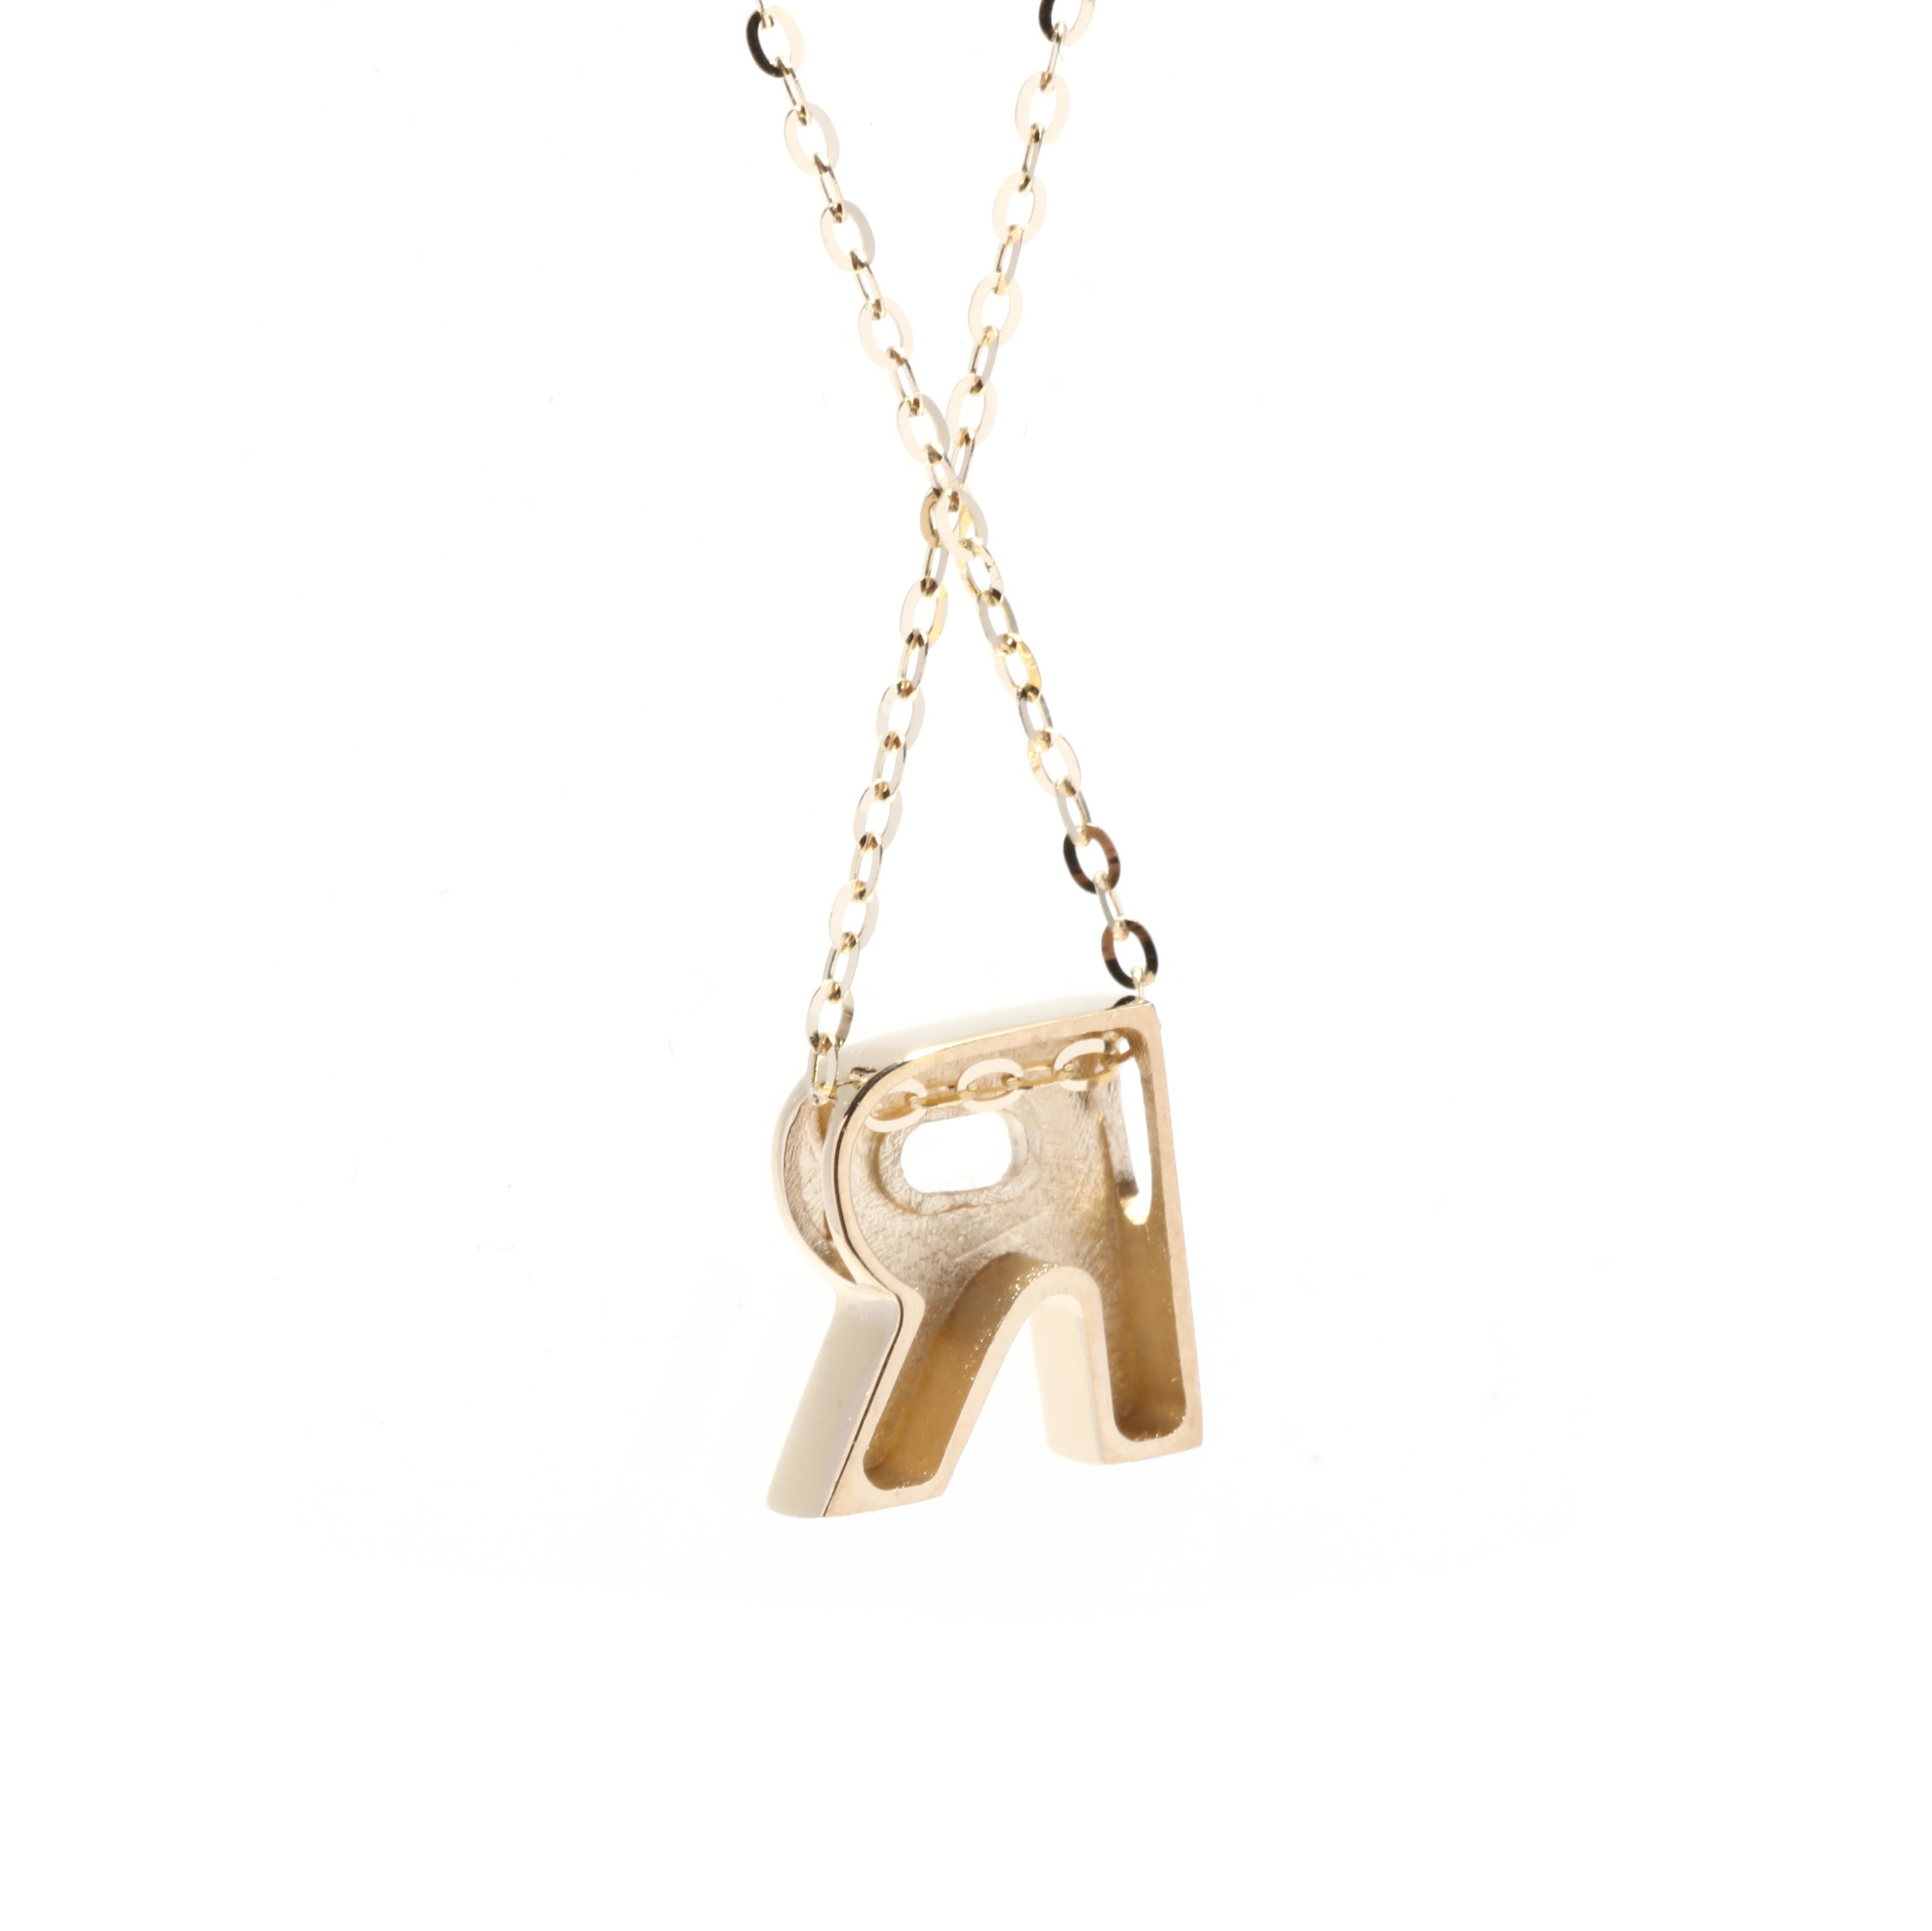 This beautiful R initial necklace is crafted from 14KT yellow gold and features a delicate 16-inch chain. The initial pendant is carefully designed with intricate detailing, making it a stylish and personal accessory. The gold necklace adds a touch